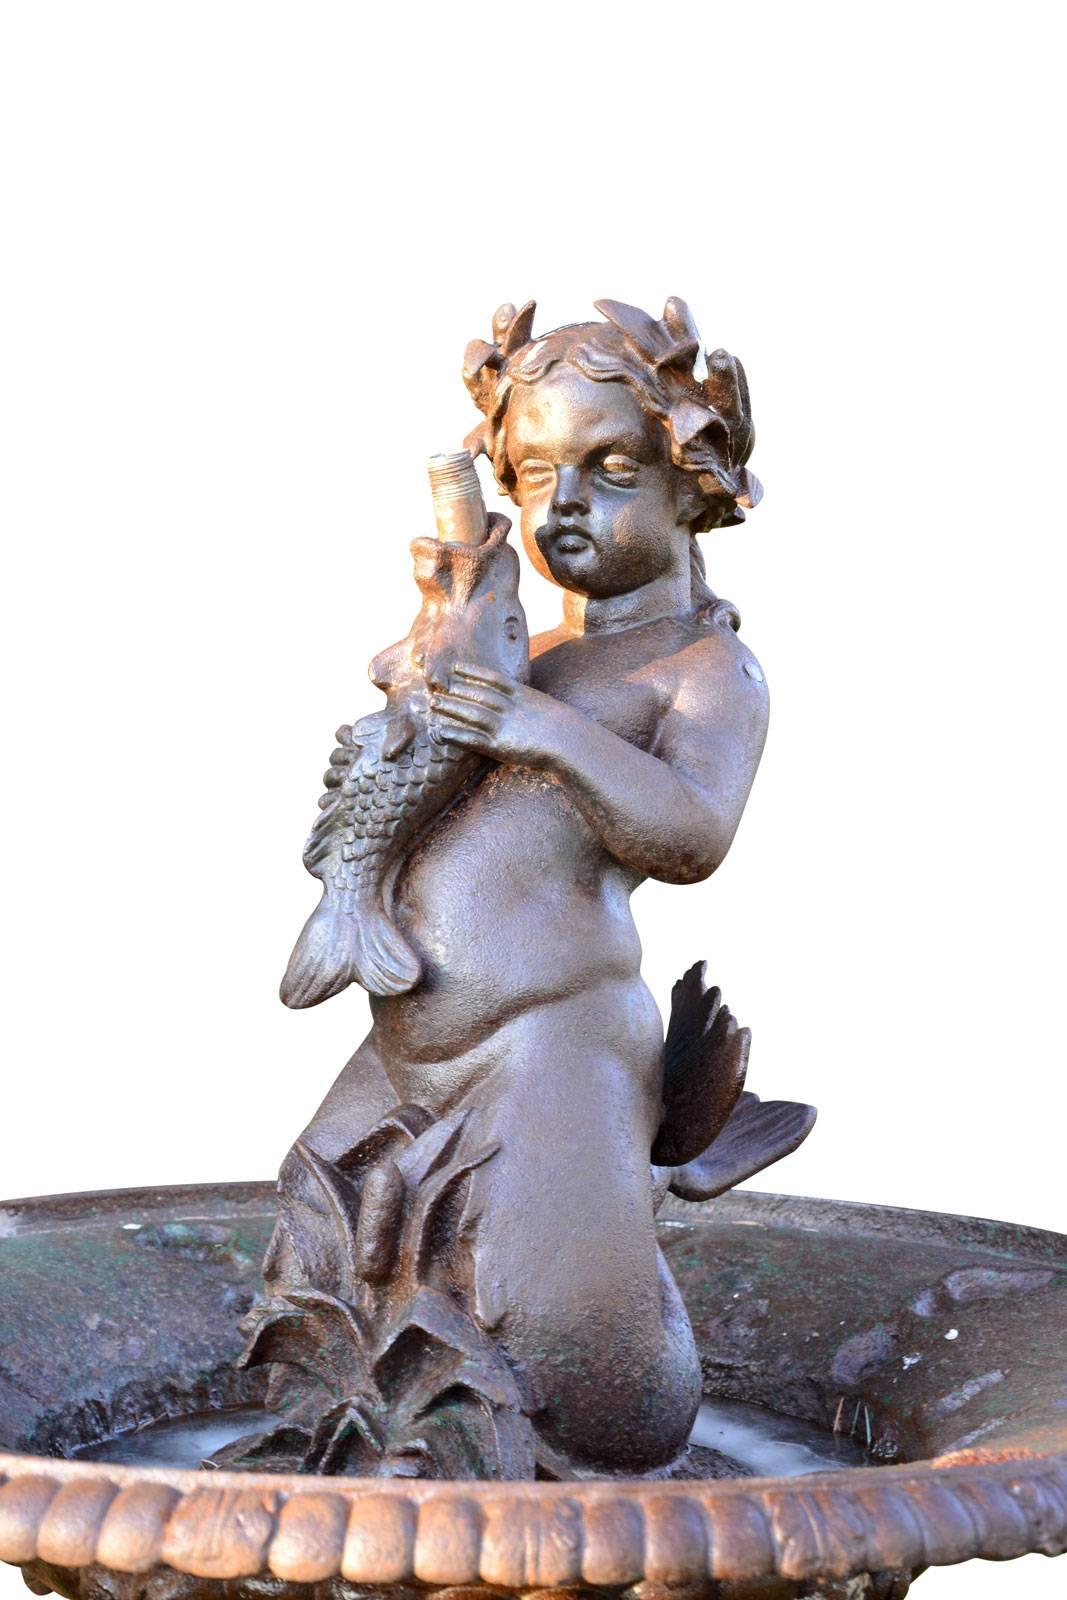 Dating from the late 19th century, cast iron fountain centerpiece decorated with triton crowned laurel holding a fish in his hands. The gadrooned basin is supported by a turned feet lavishly decorated with flowers, acanthus leaves ending with a